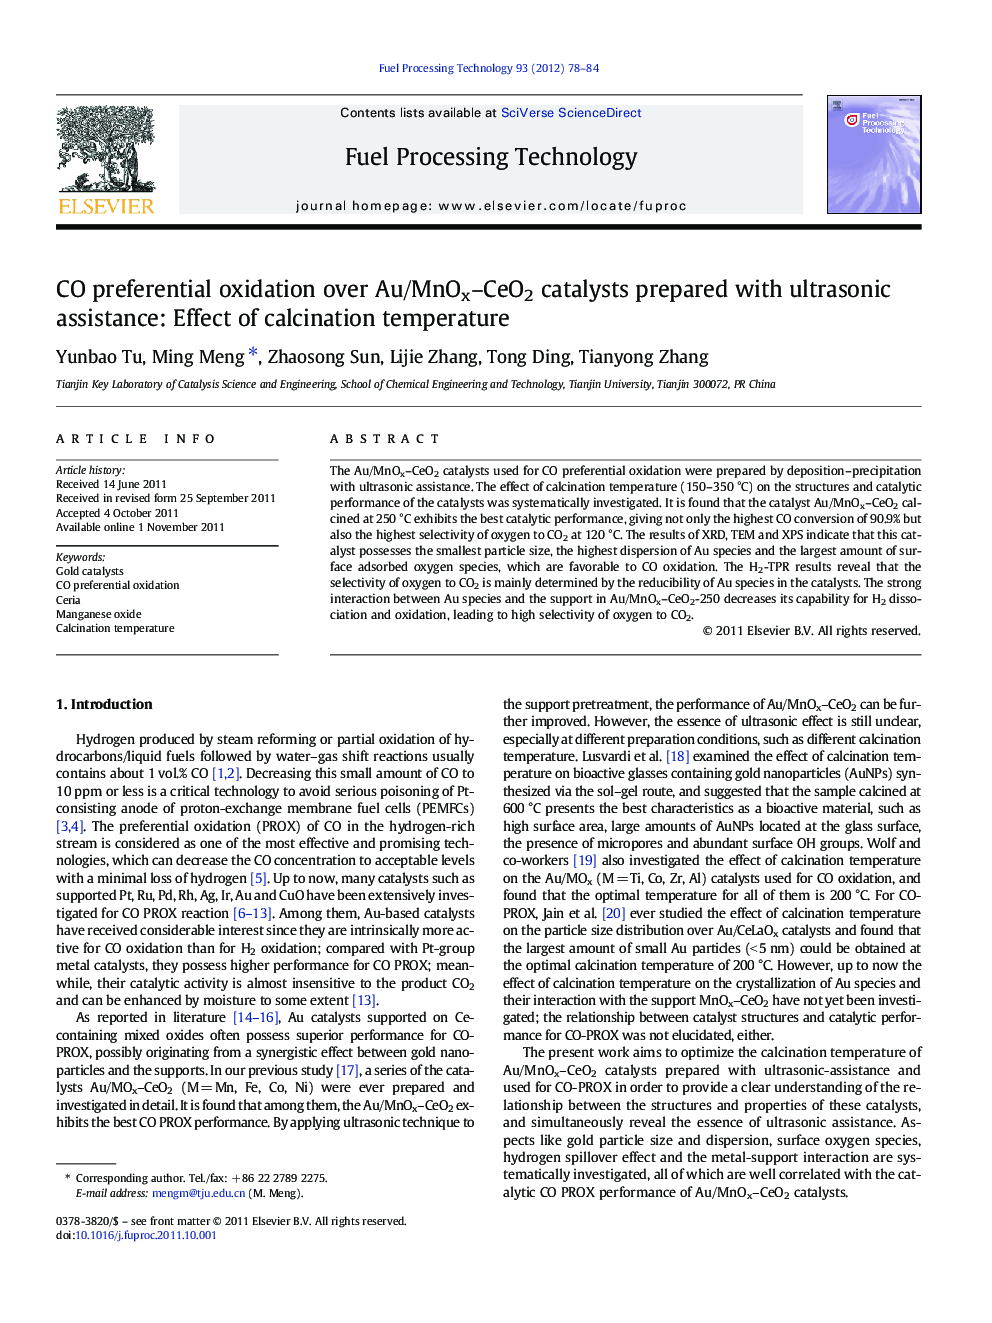 CO preferential oxidation over Au/MnOx–CeO2 catalysts prepared with ultrasonic assistance: Effect of calcination temperature